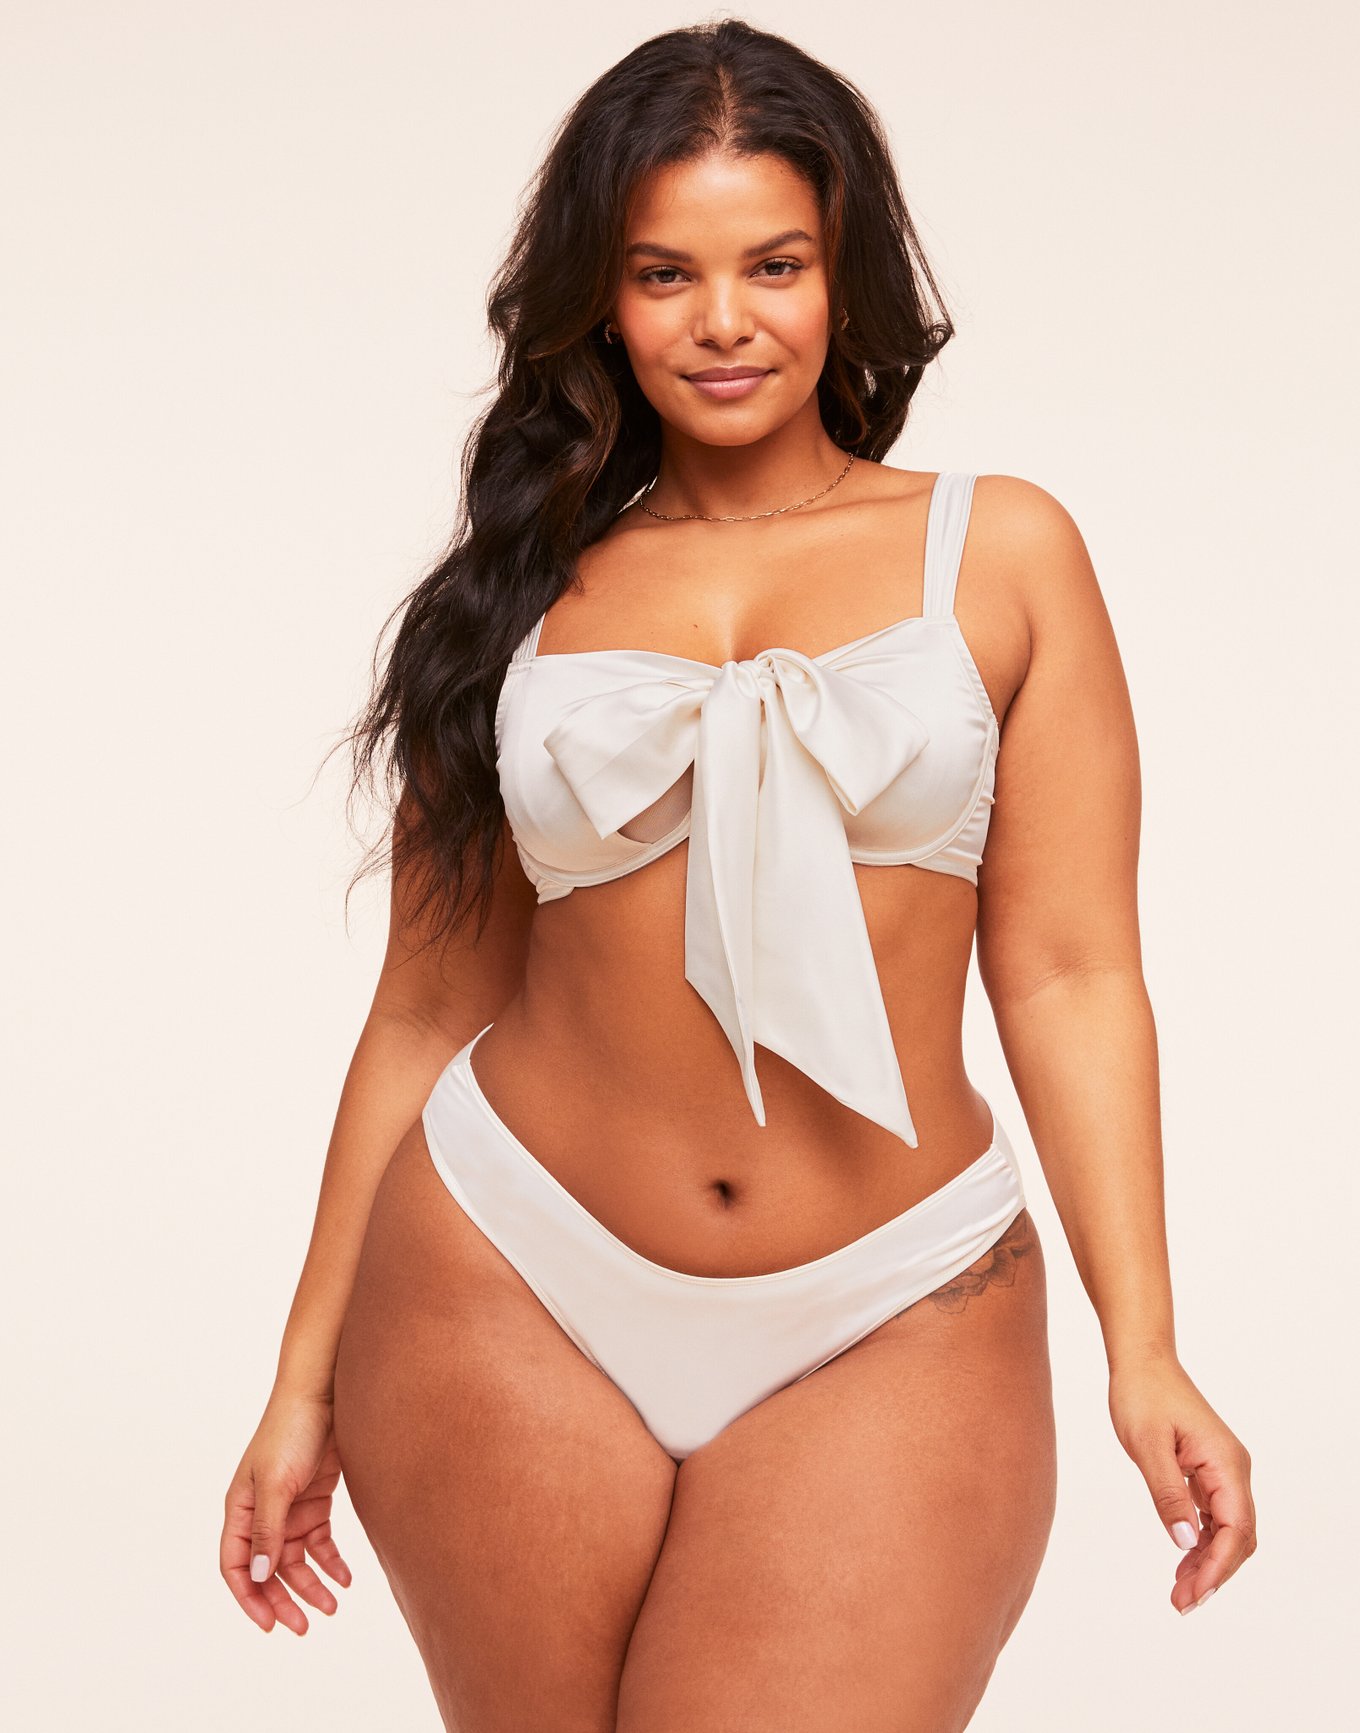 Your First Look at the Plus Size Lingerie at Adore Me